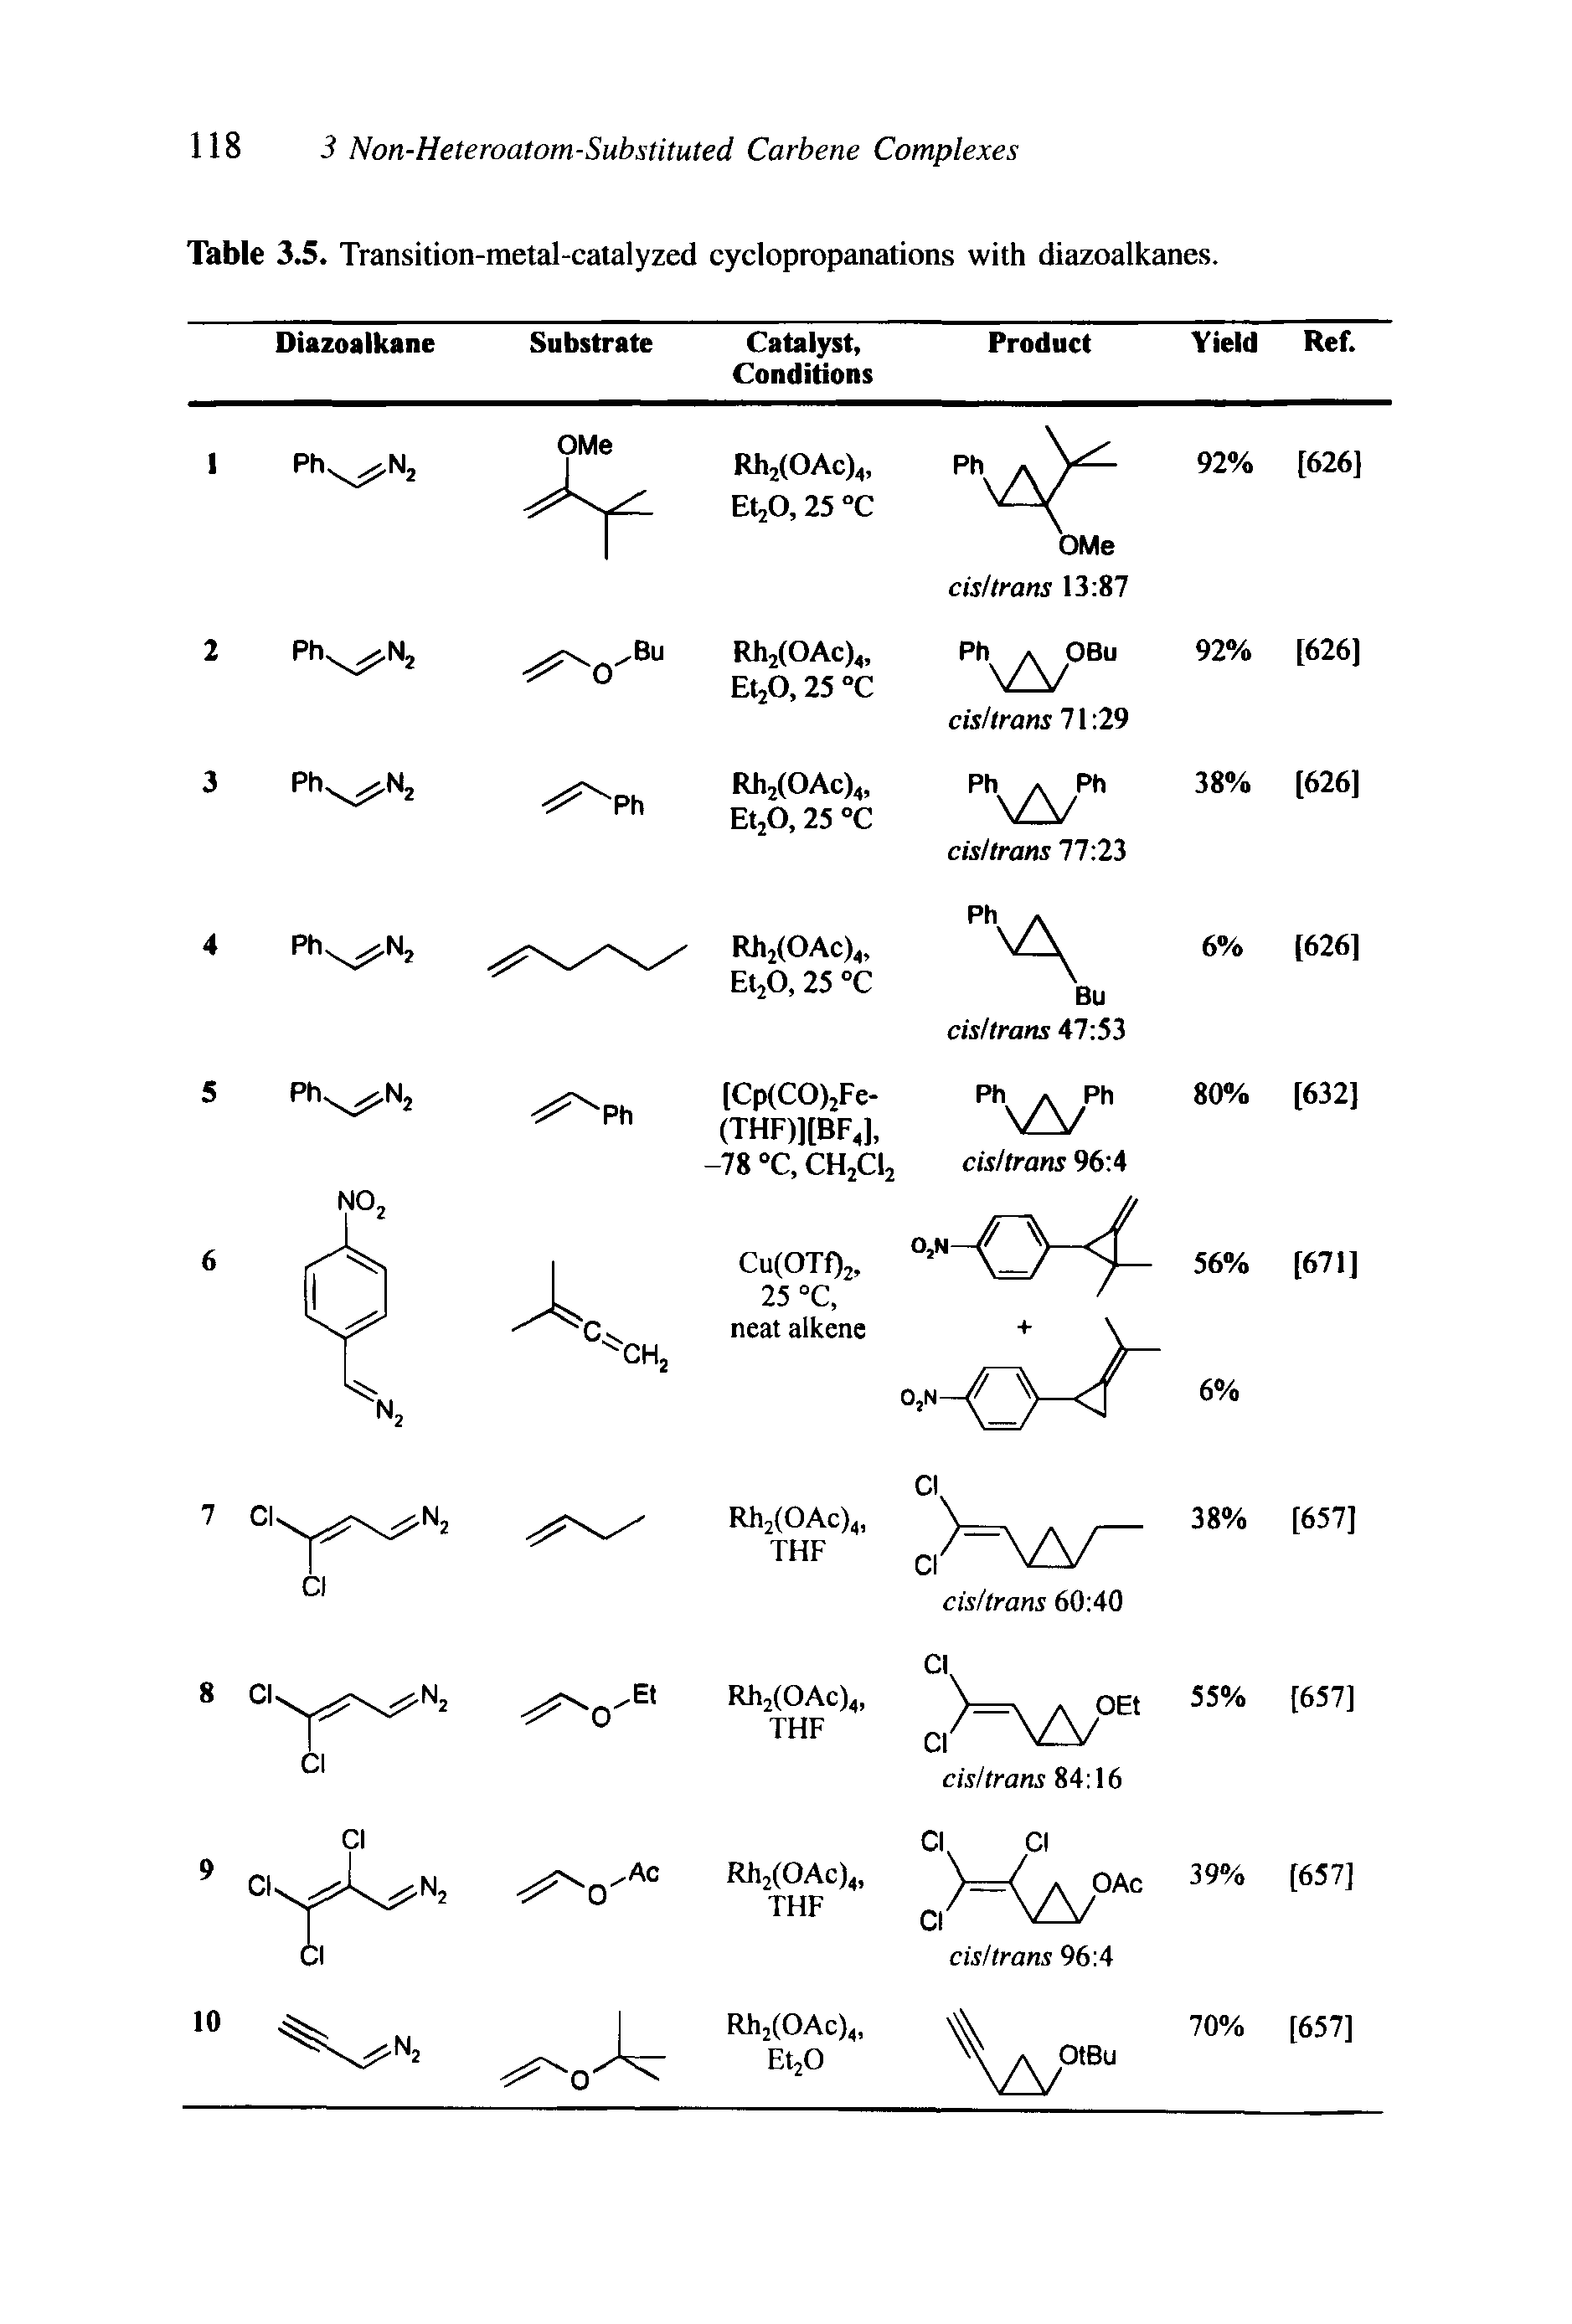 Table 3.5. Transition-metal-catalyzed cyclopropanations with diazoalkanes.